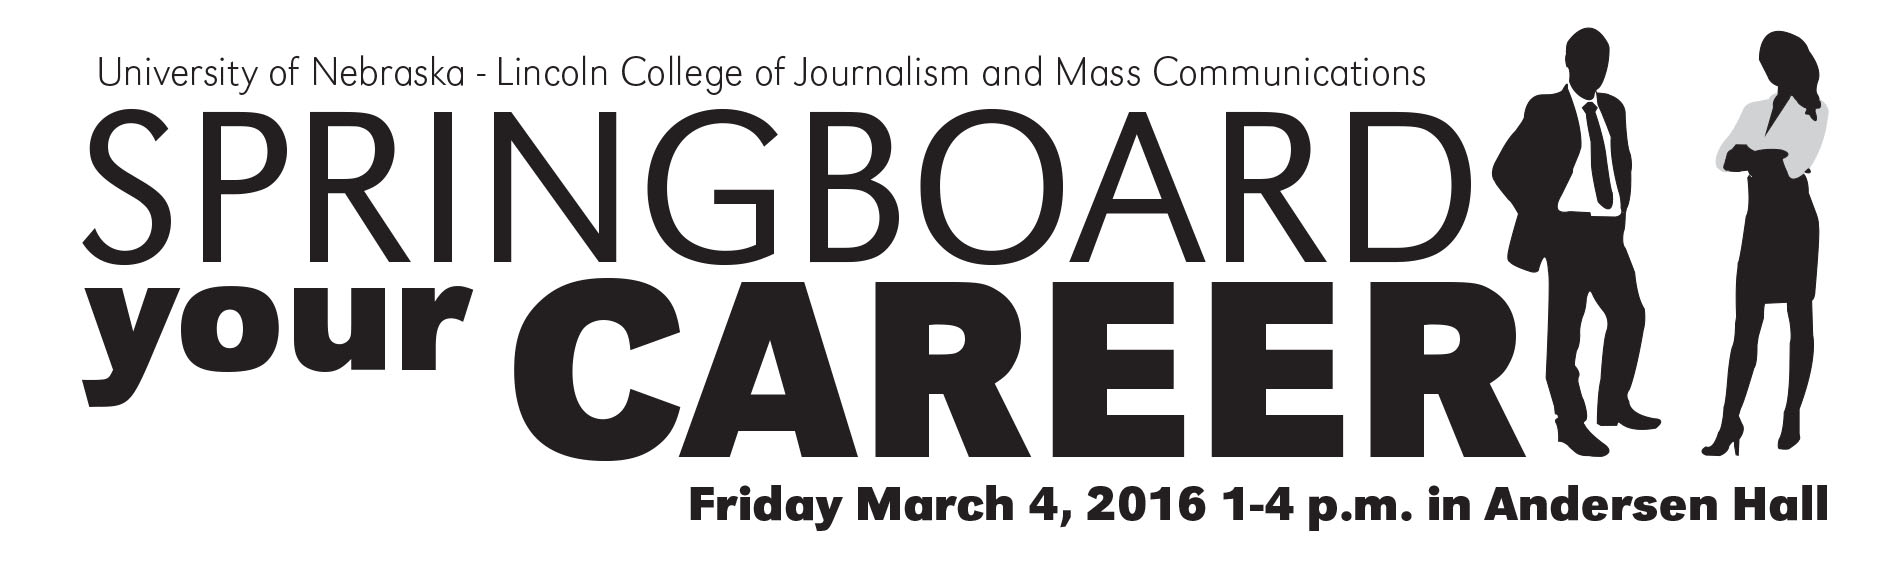 Springboard Your Career will be March 4.